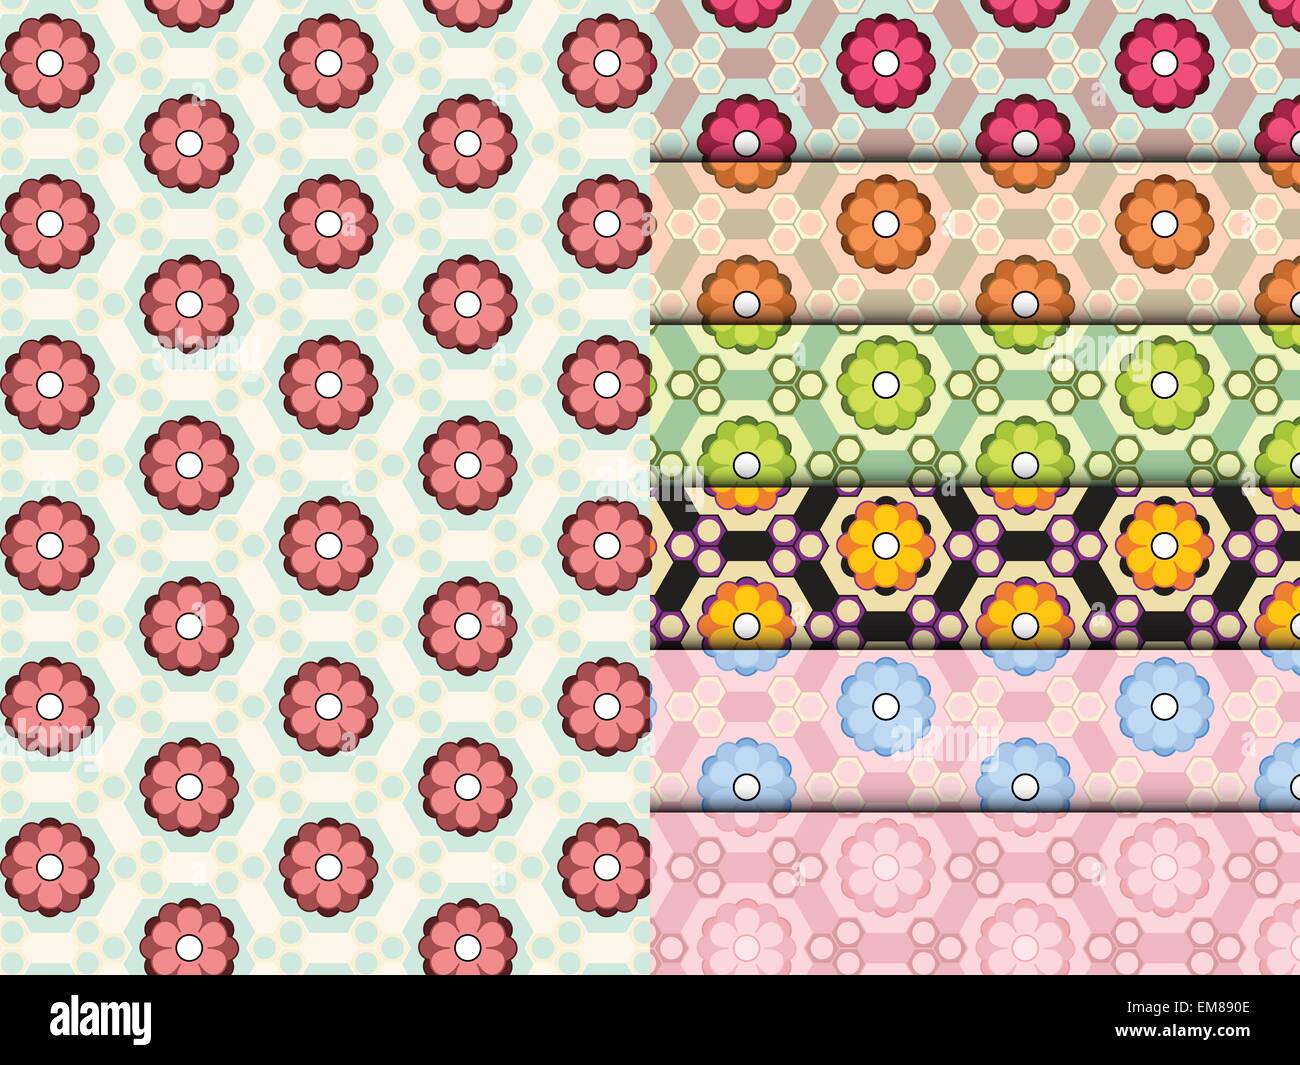 Seamless Flower Pattern Colorful Set Vector Stock Vector